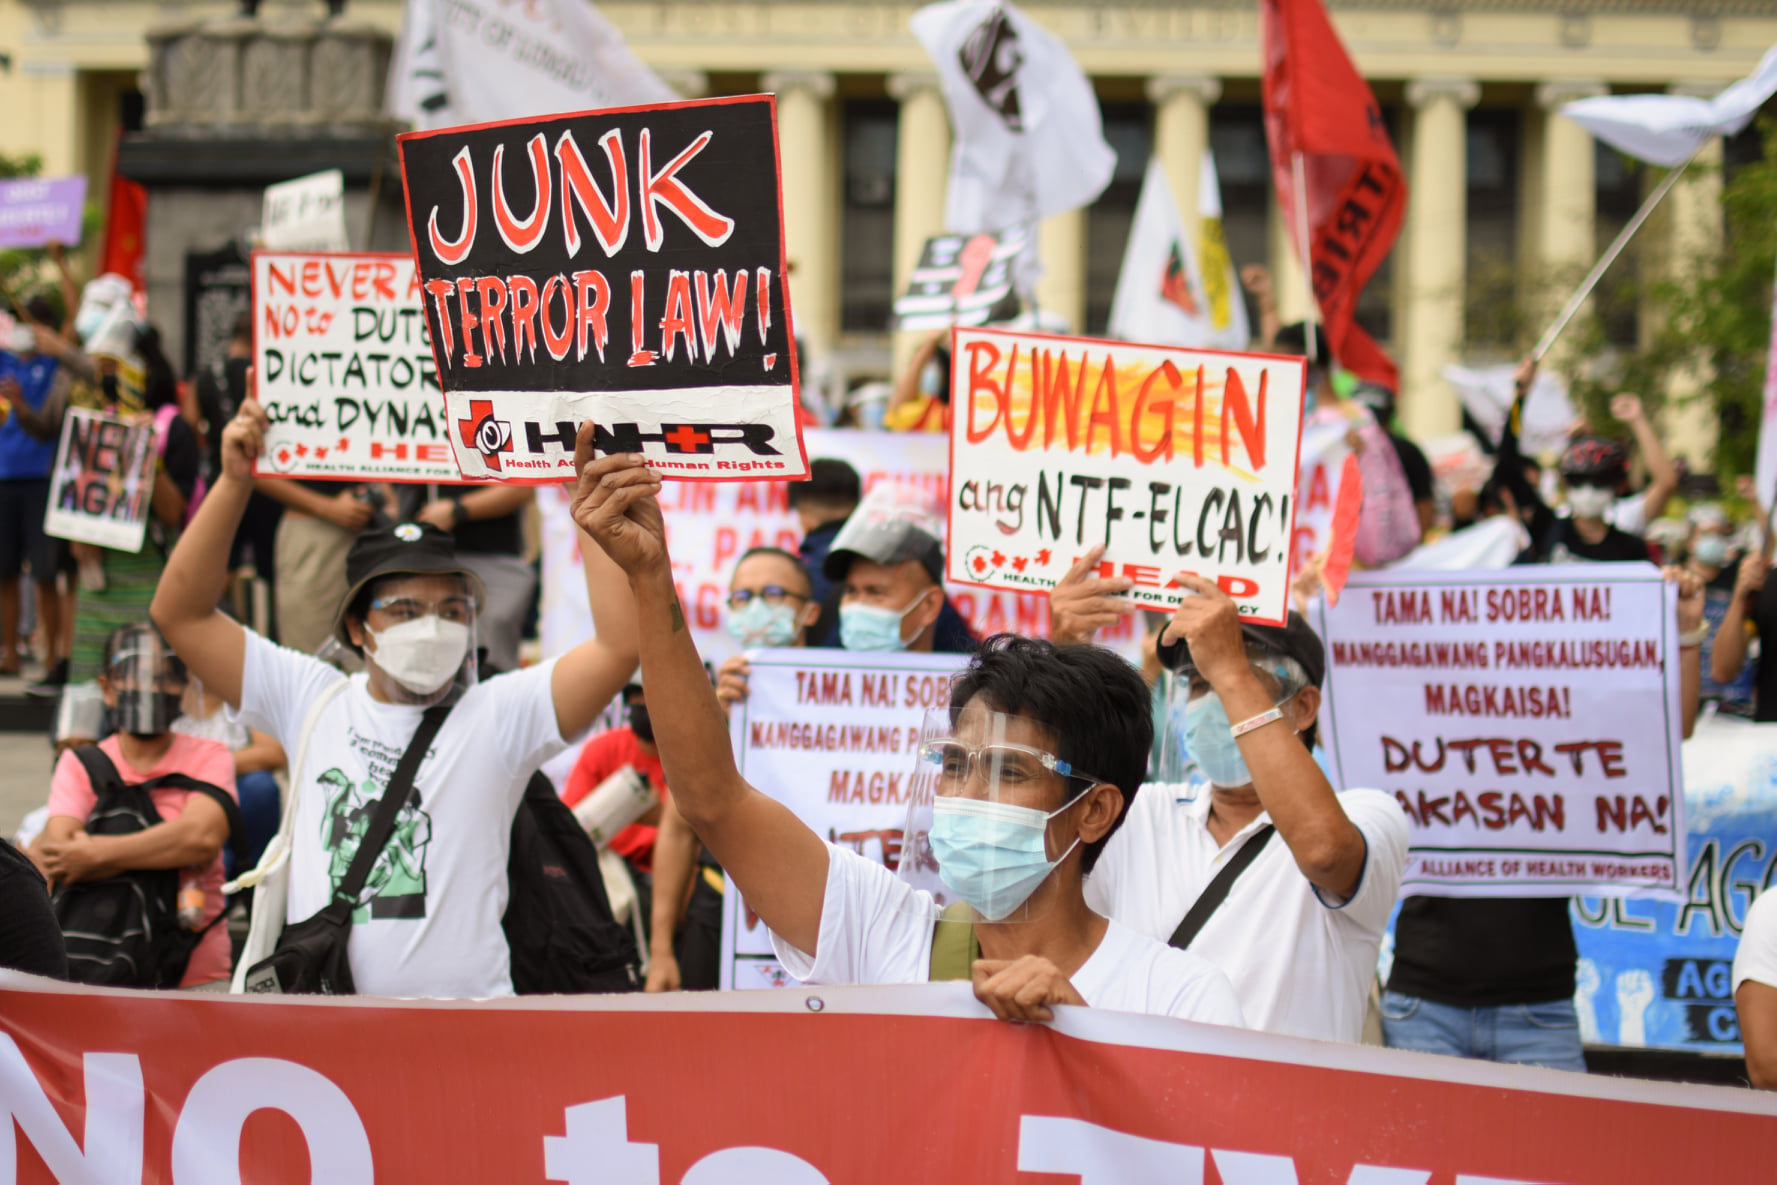 End Duterte’s state terror, heed people’s call for justice and accountability